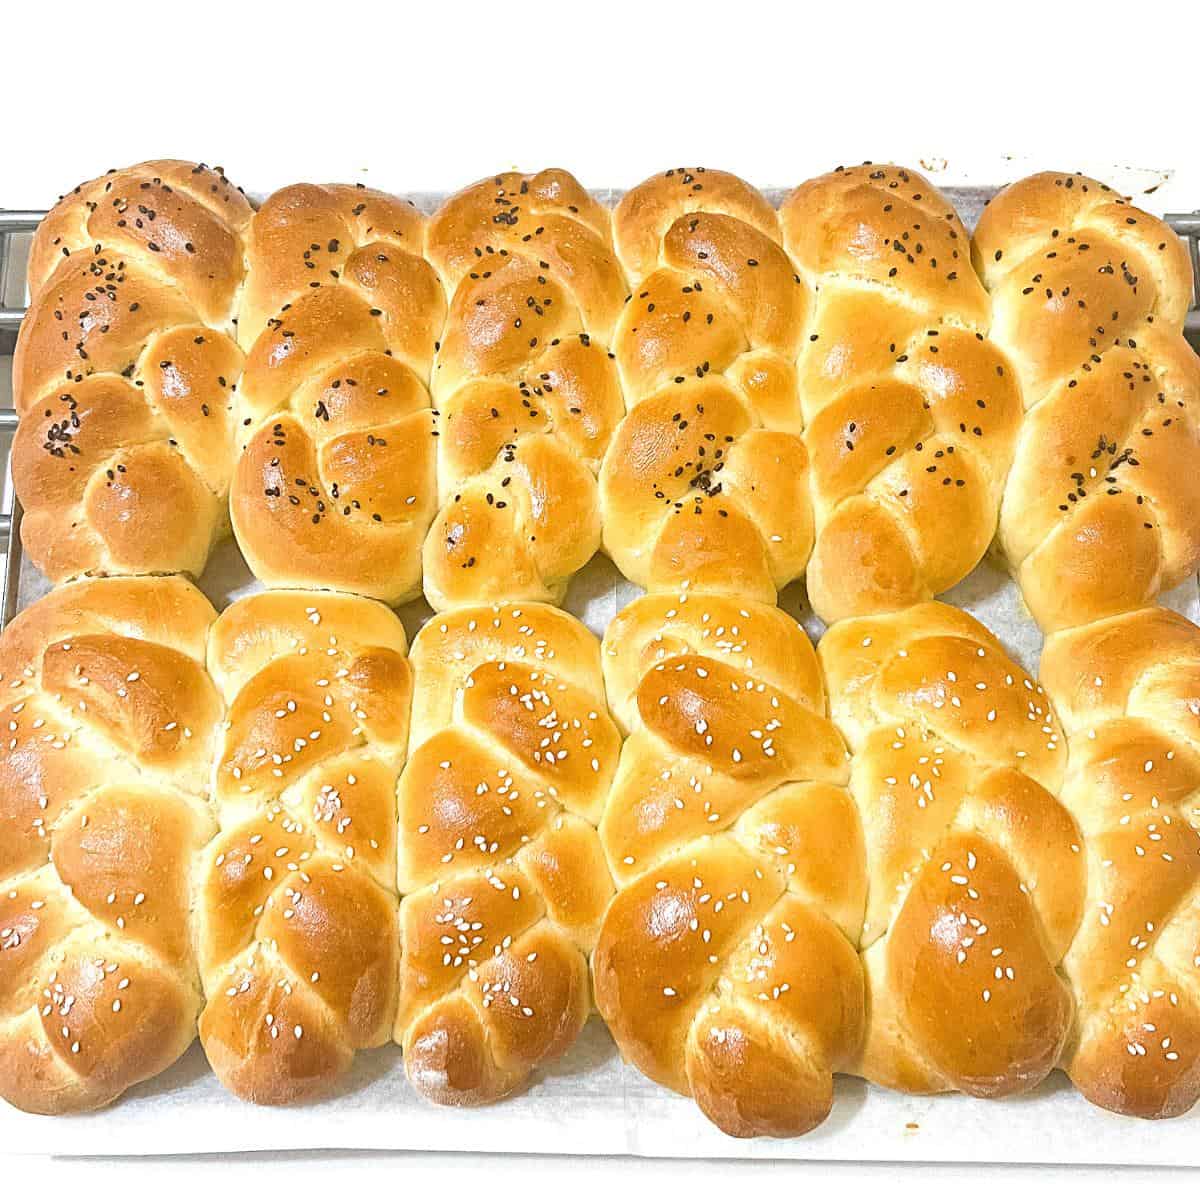 A slab of braided dinner rolls on the table.